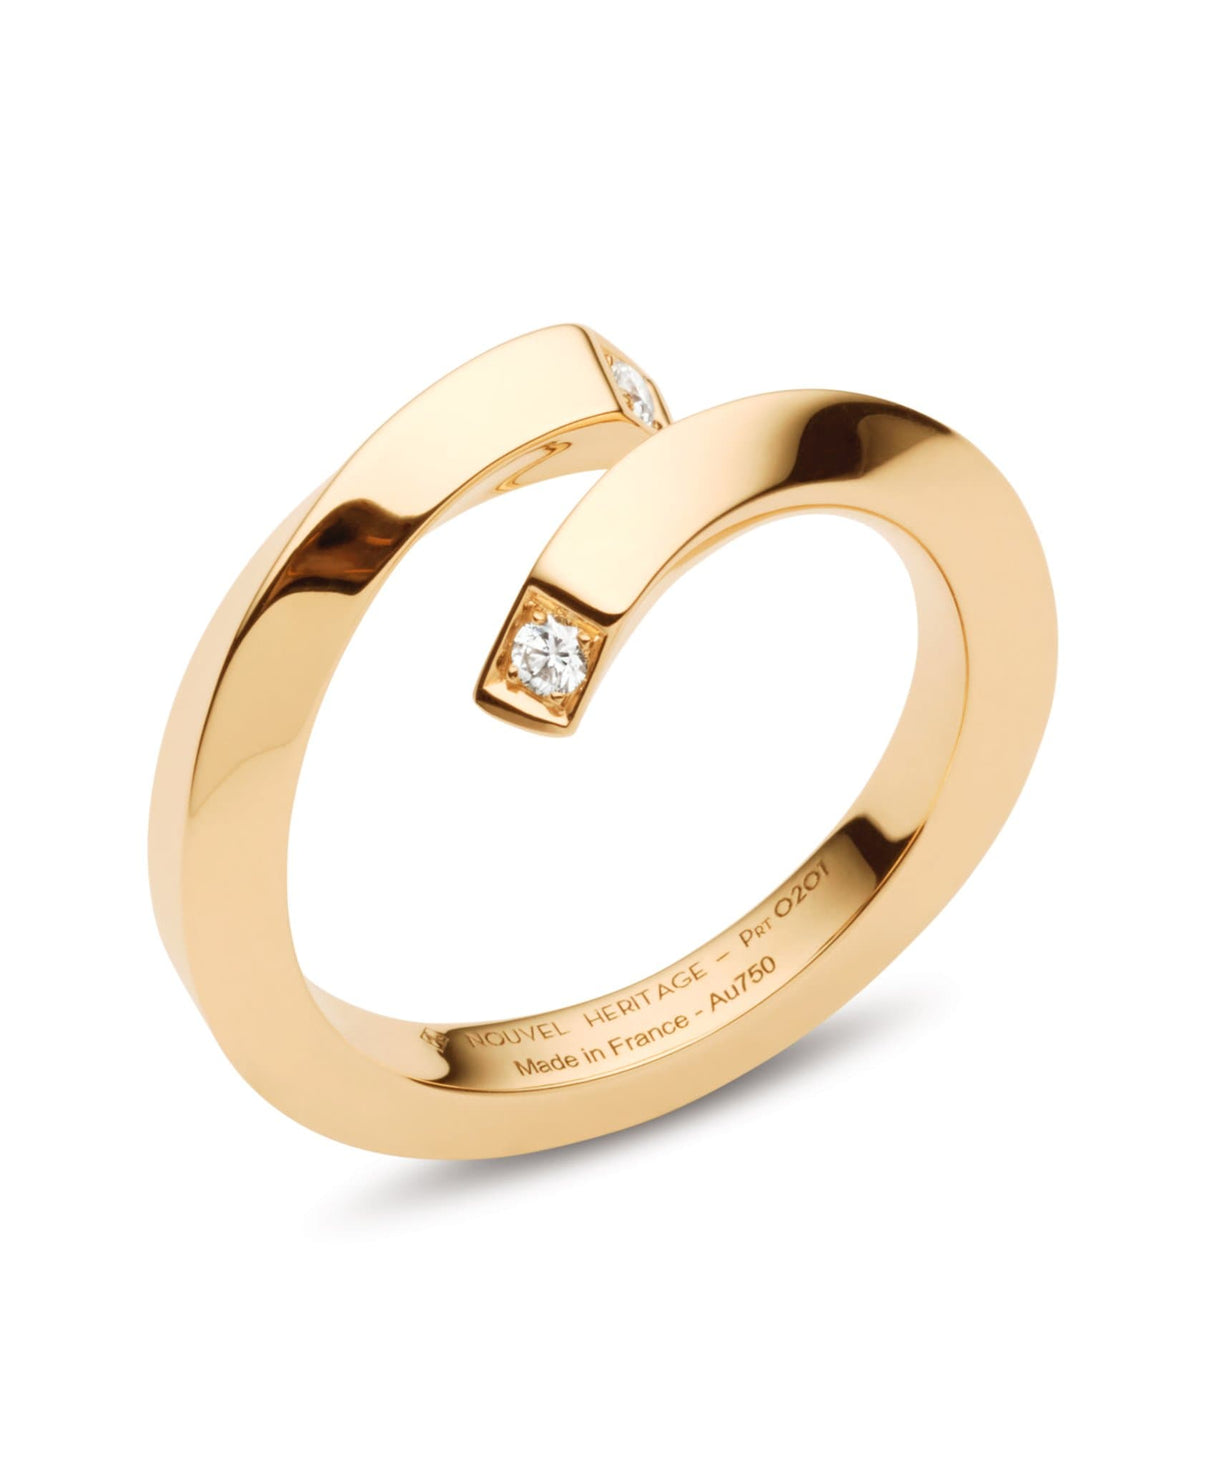 Gold Thread Ring: Discover Luxury Fine Jewelry | Nouvel Heritage